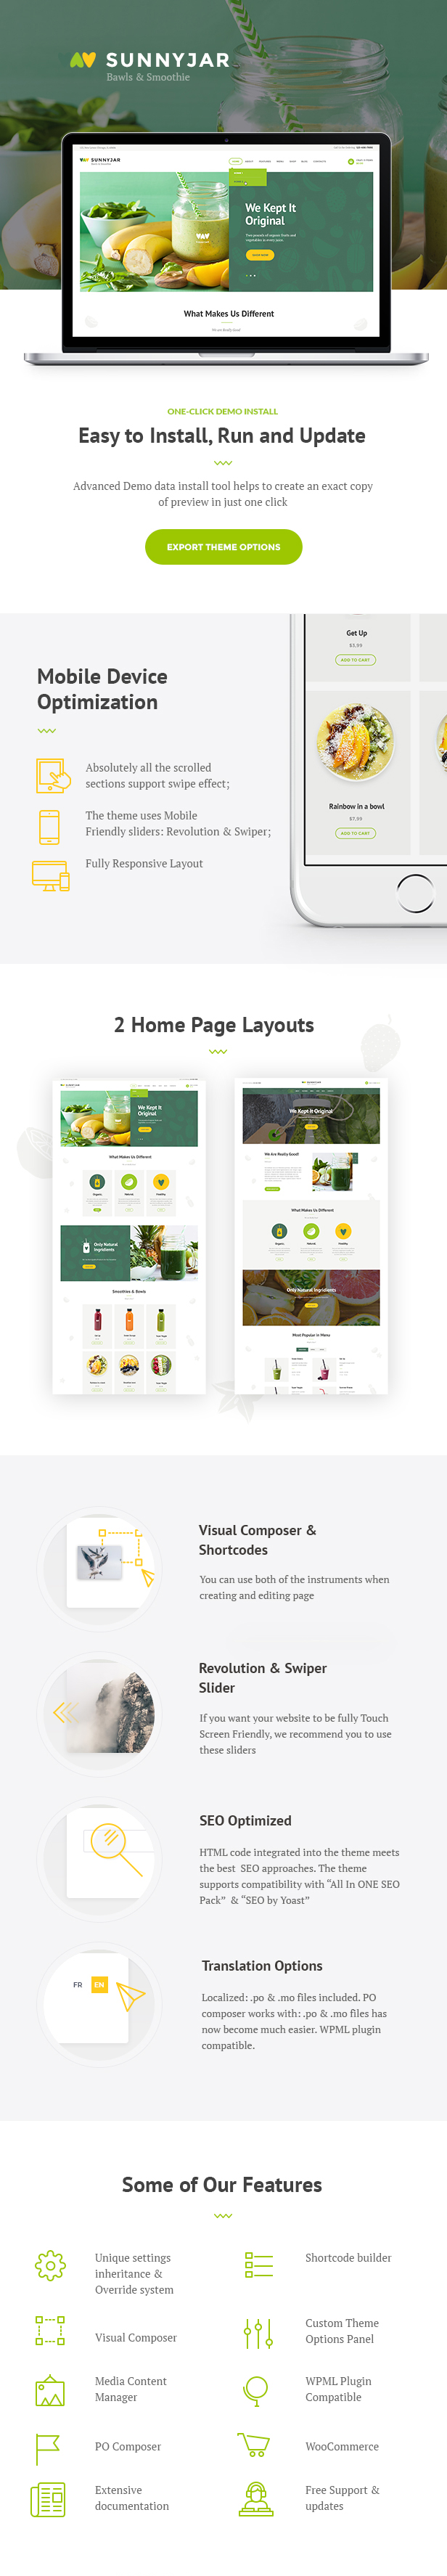 Smoothie Bar & Healthy Drinks Shop WordPress Theme features